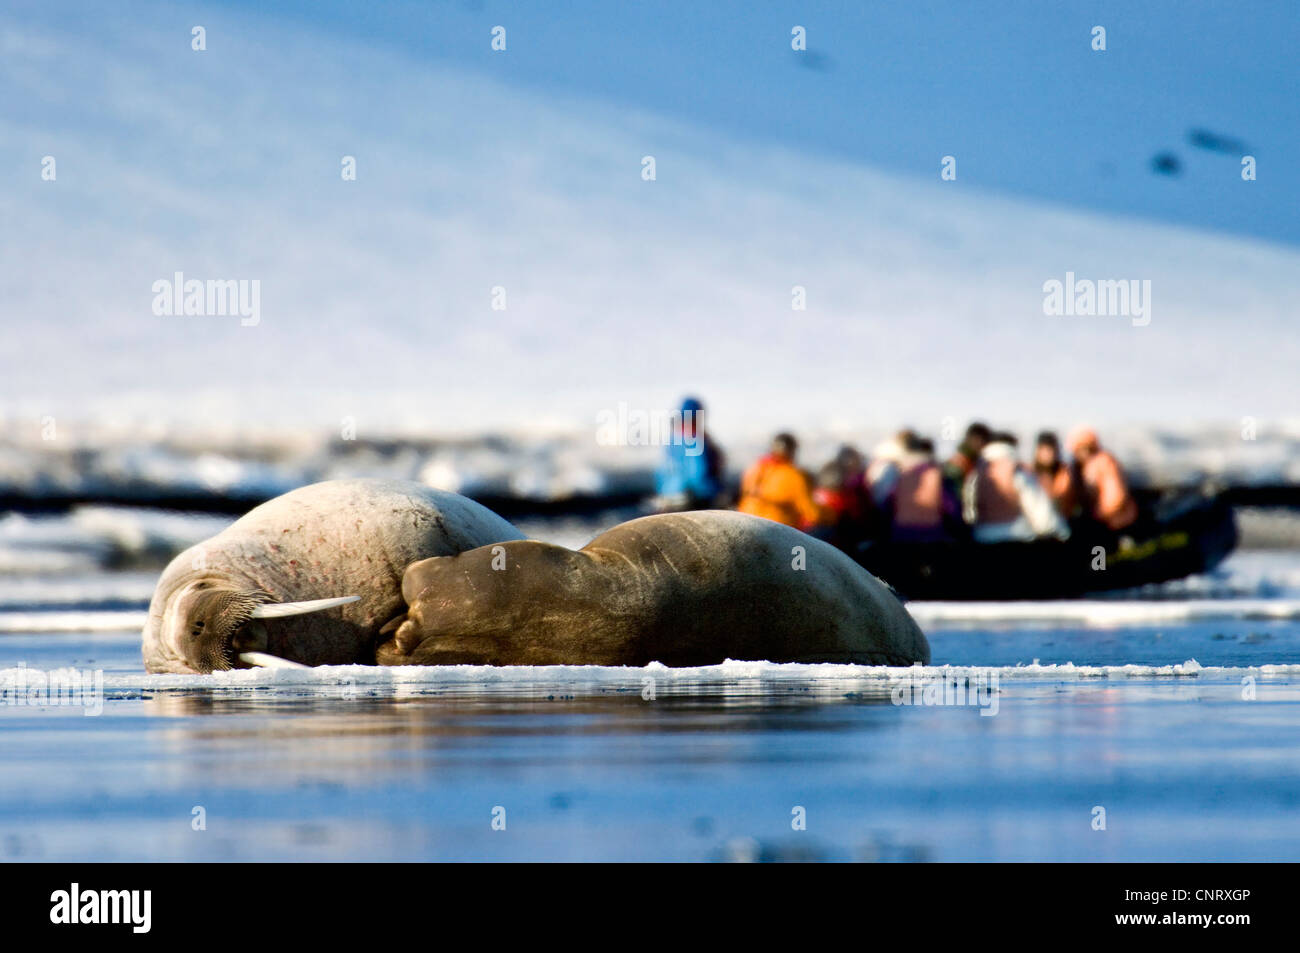 walrus (Odobenus rosmarus), Whalruses and eco-tourists from the wesssle, Norway Stock Photo